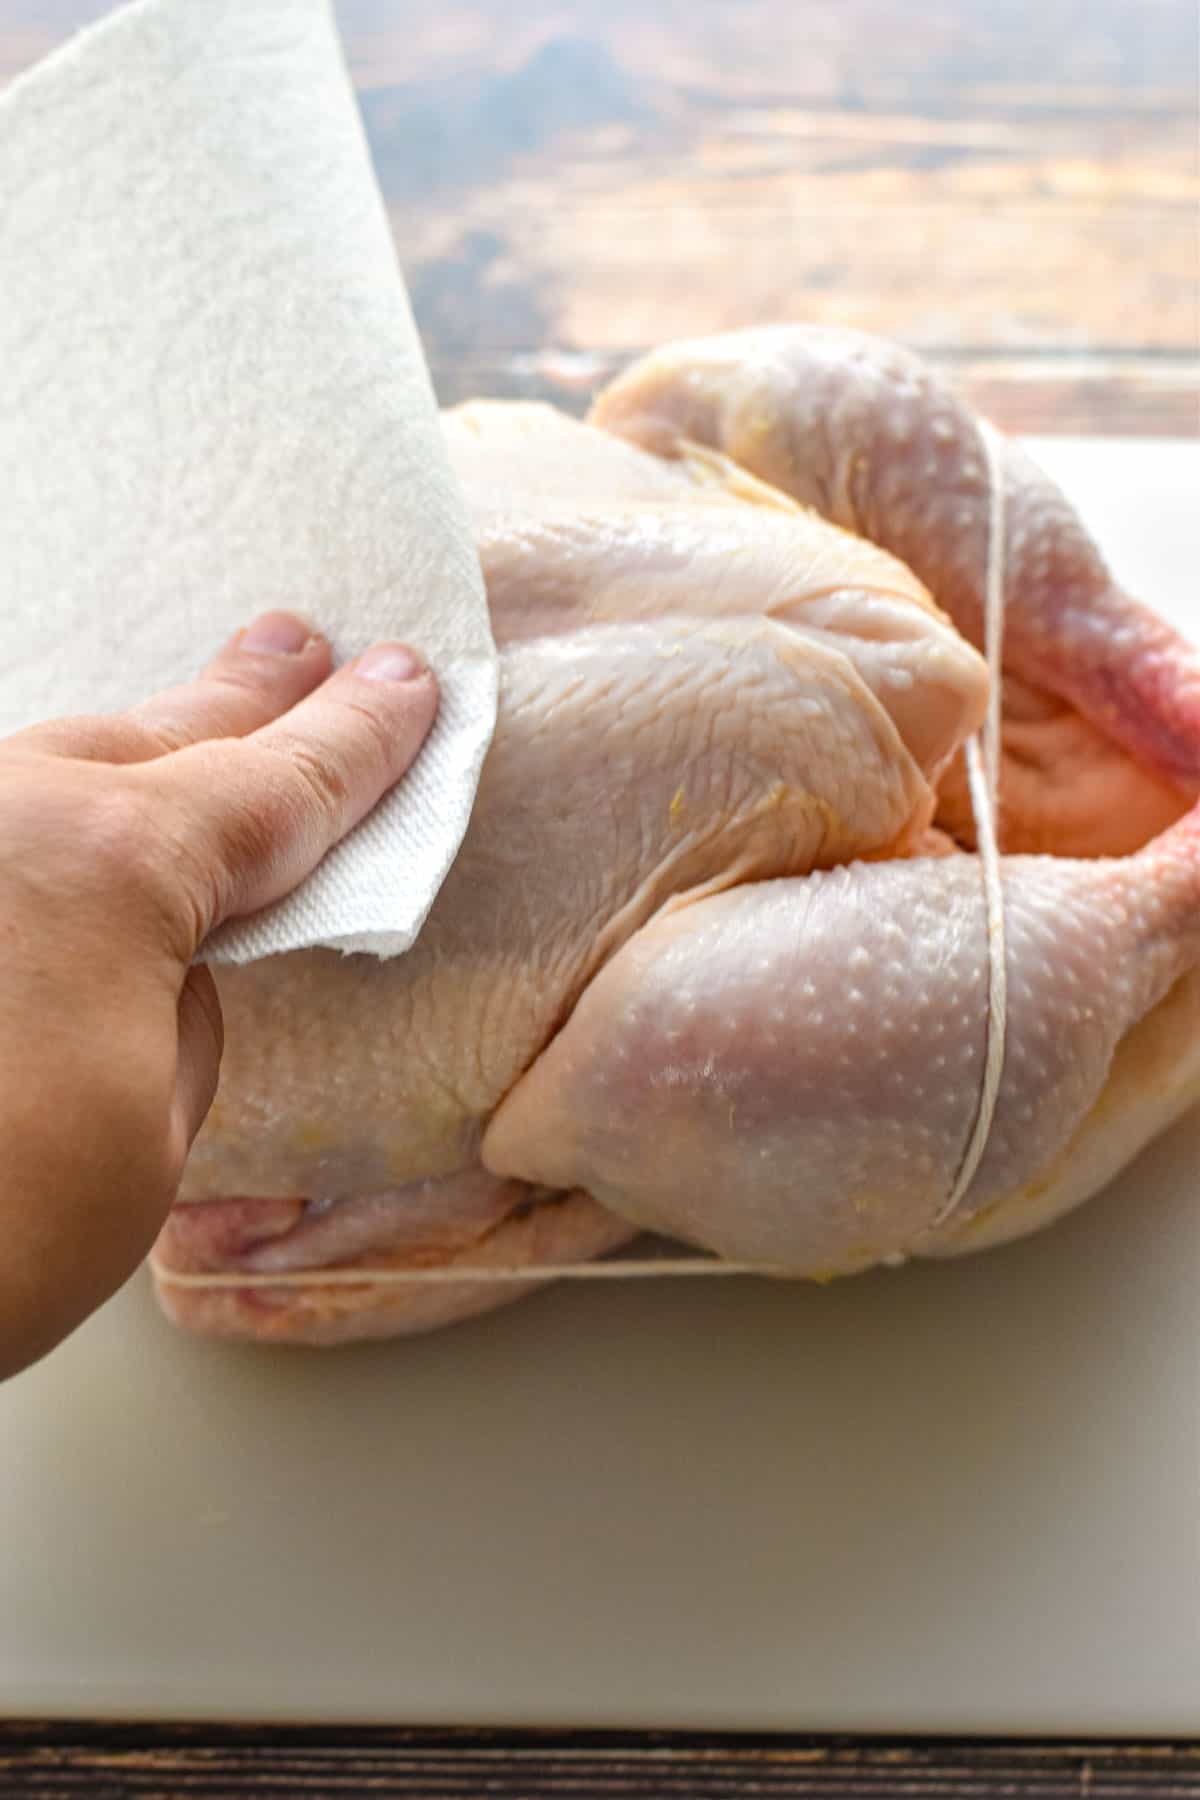 a hand drying a trussed raw whole chicken with paper towels